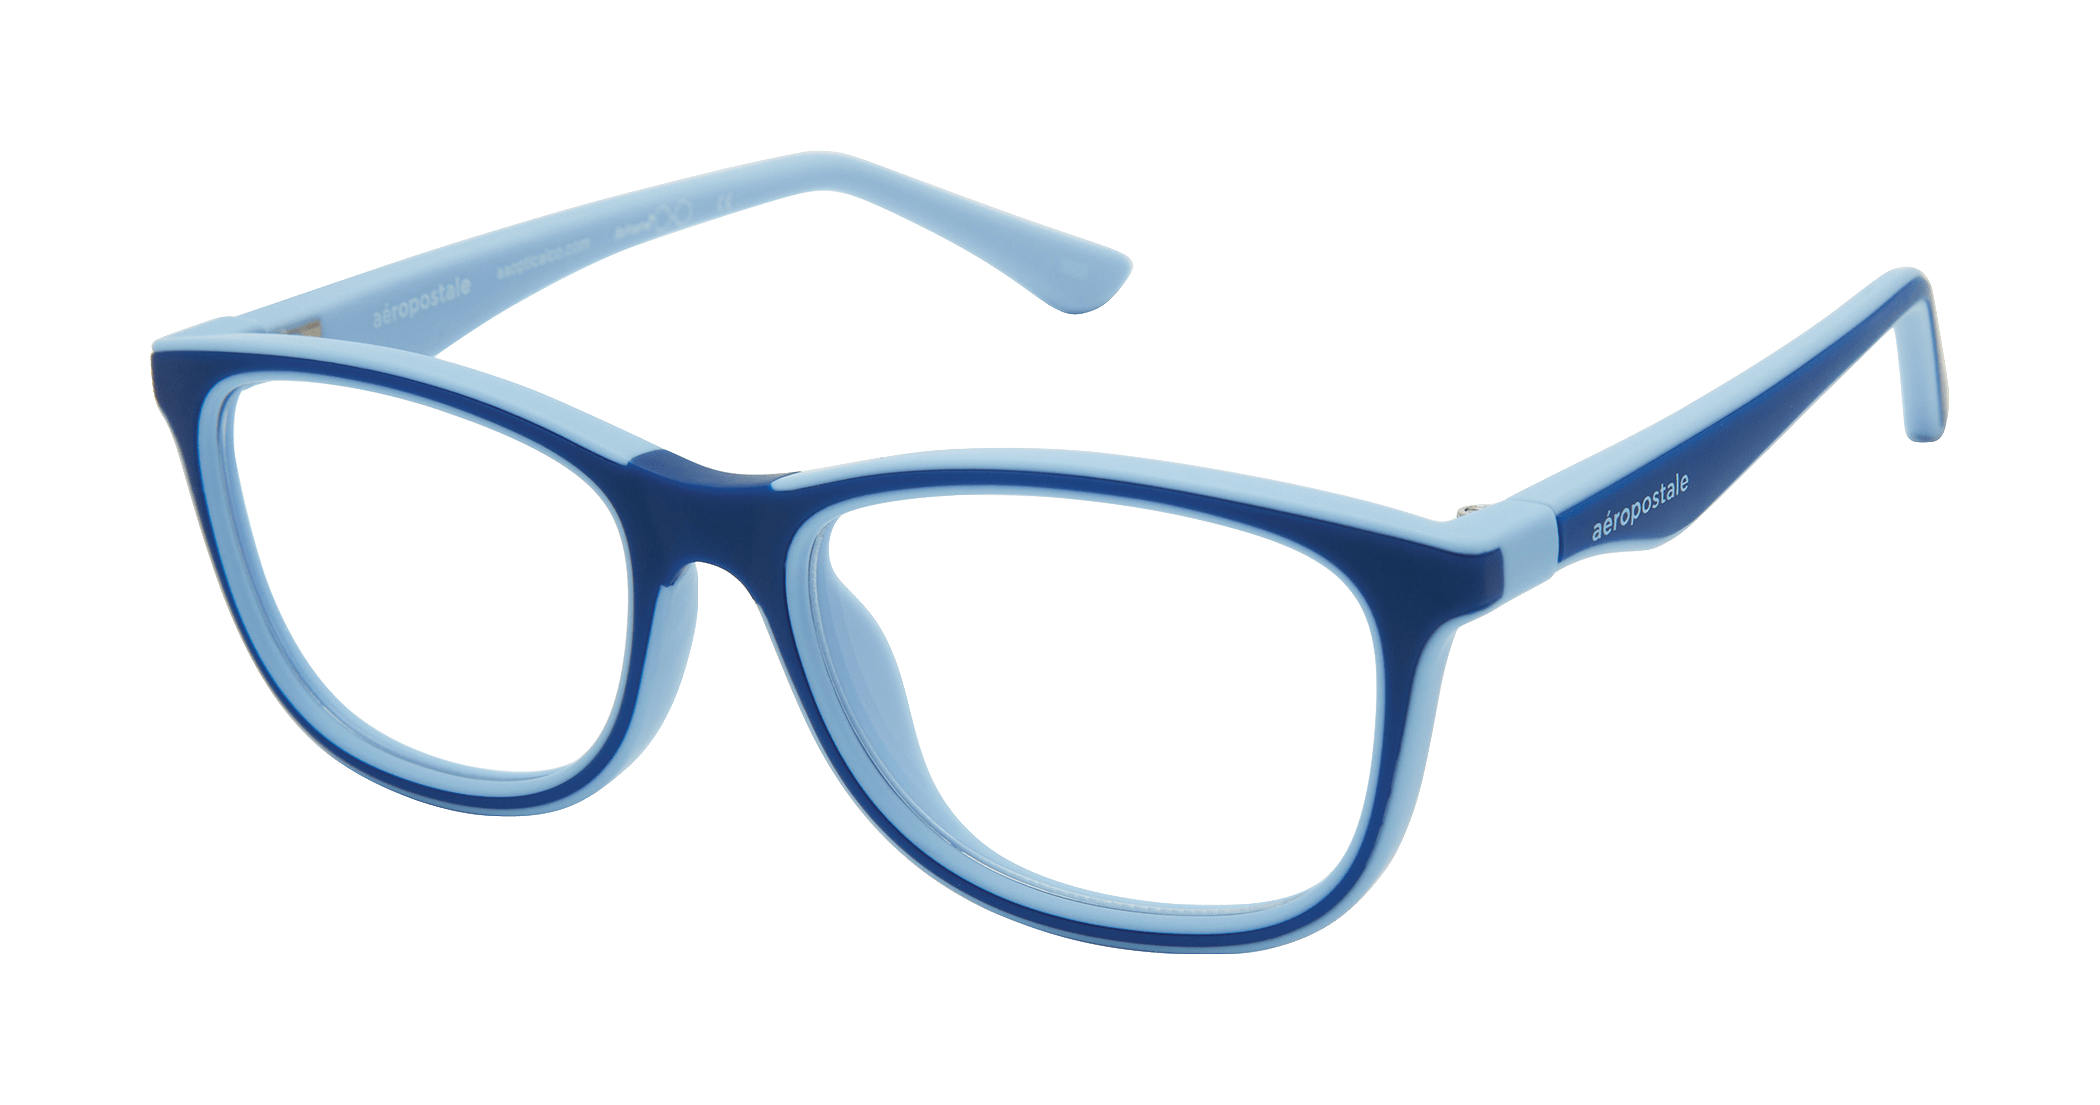 Aéro Kids SCARCITY frames in Ocean/Navy by A&A Optical